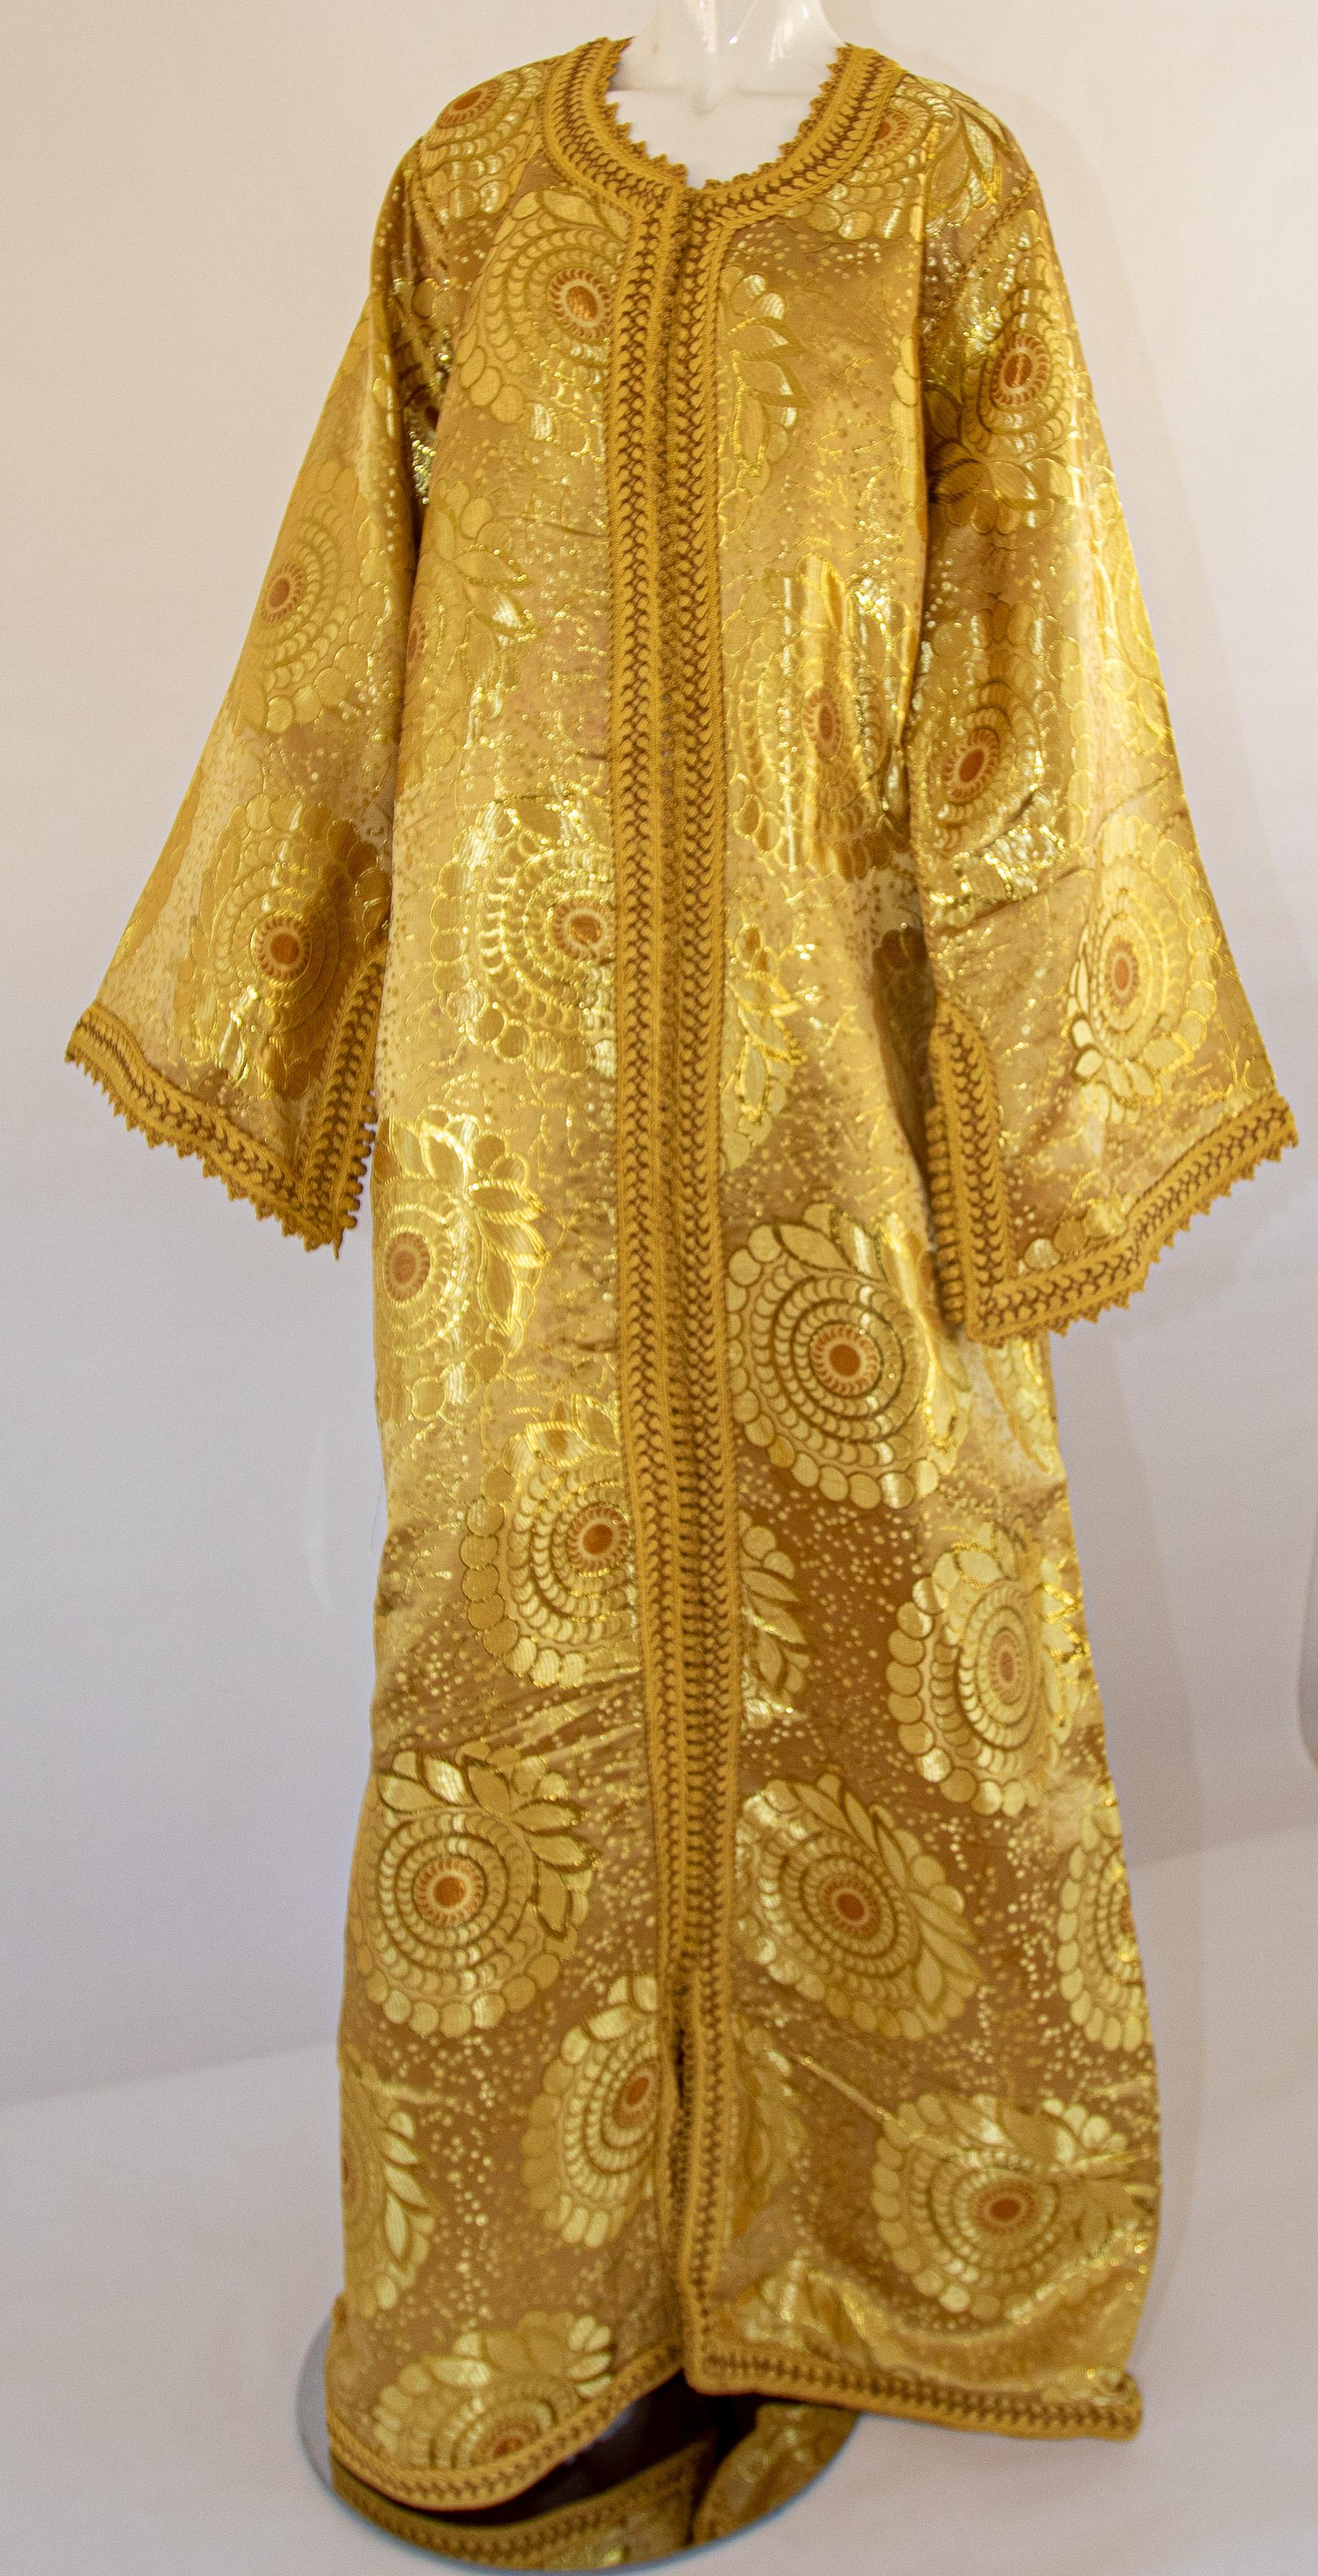 Moroccan Vintage Caftan Gown in Gold Brocade Maxi Dress Kaftan Size L to XL For Sale 3